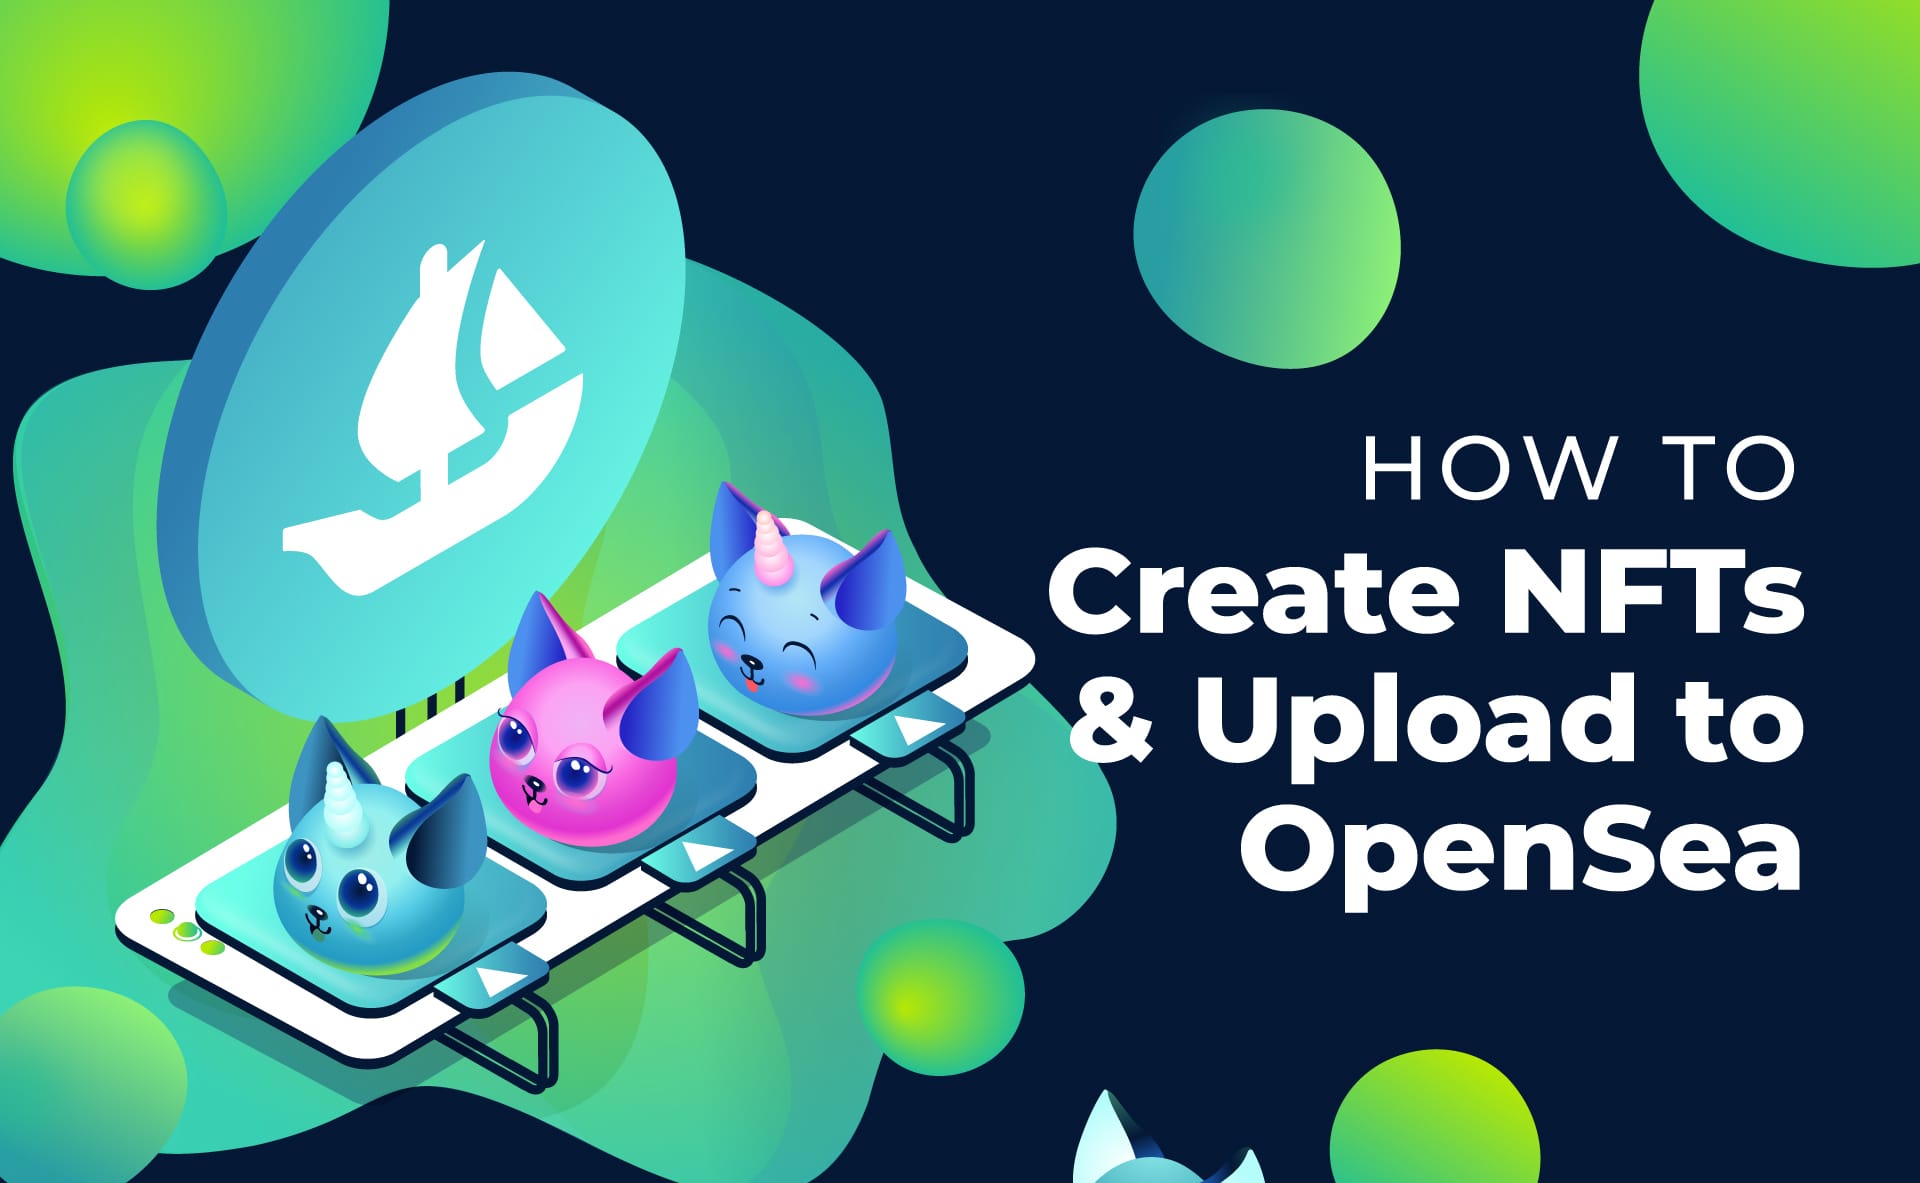 Explaining OpenSea - What is OpenSea and How Is It Used? - Moralis Academy